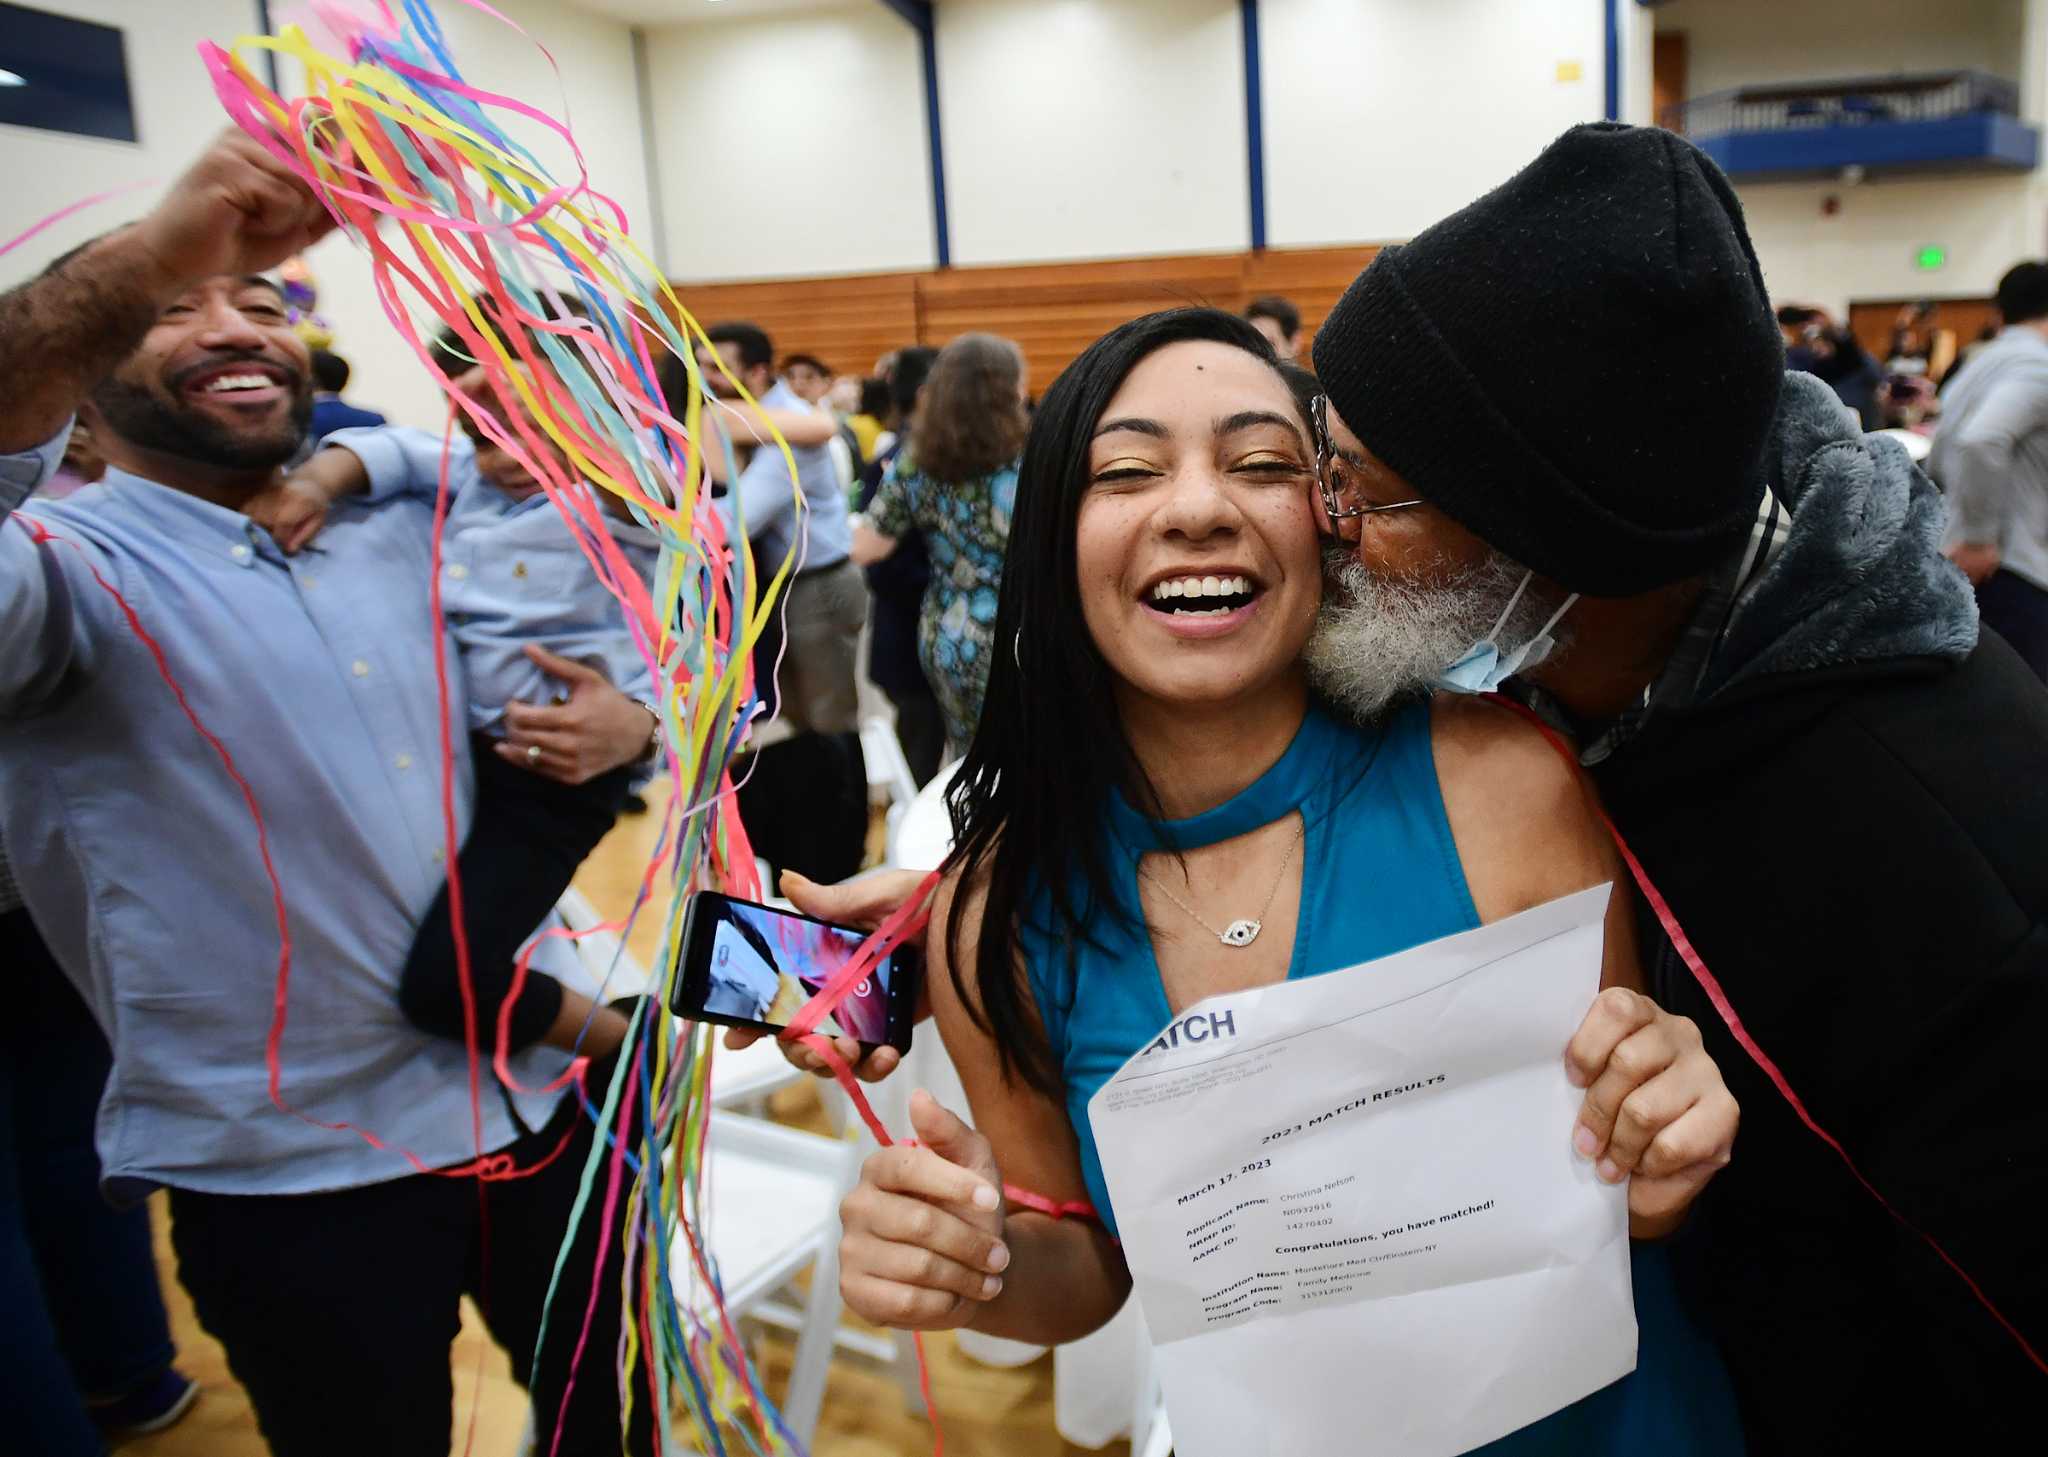 New Haven-area medical students celebrate residency assignments on 'Match Day'